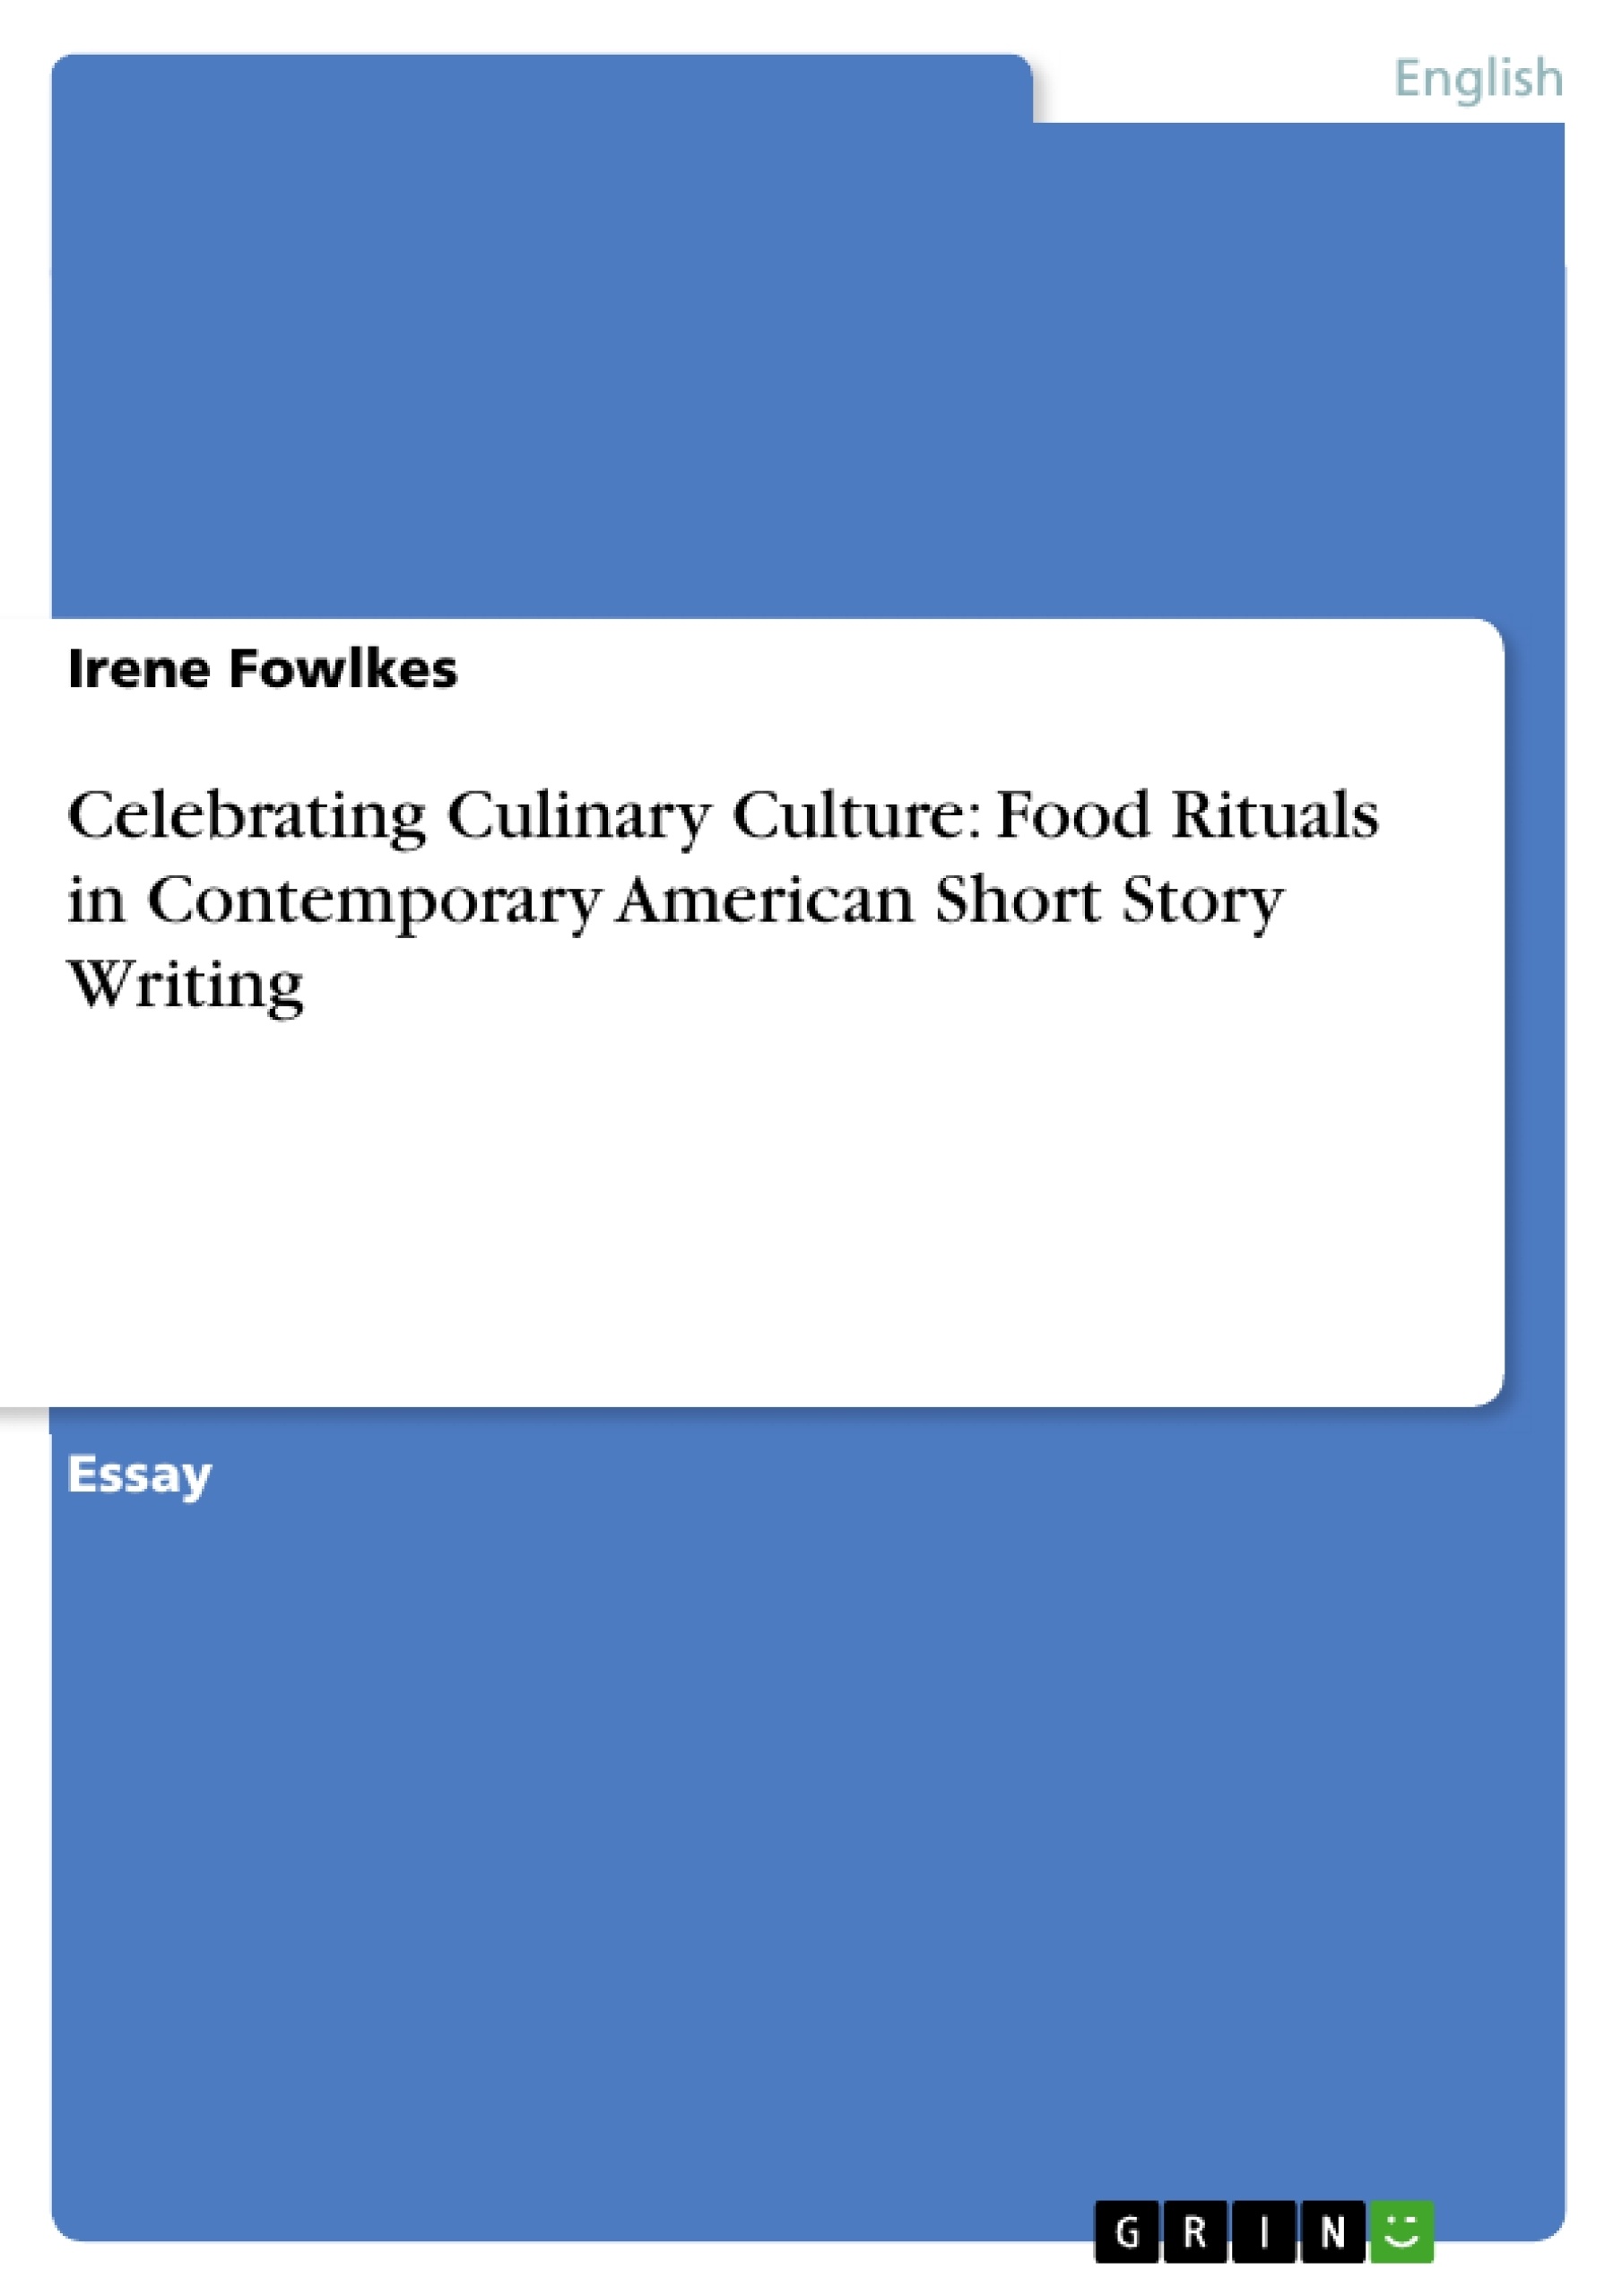 Title: Celebrating Culinary Culture: Food Rituals in Contemporary American Short Story Writing